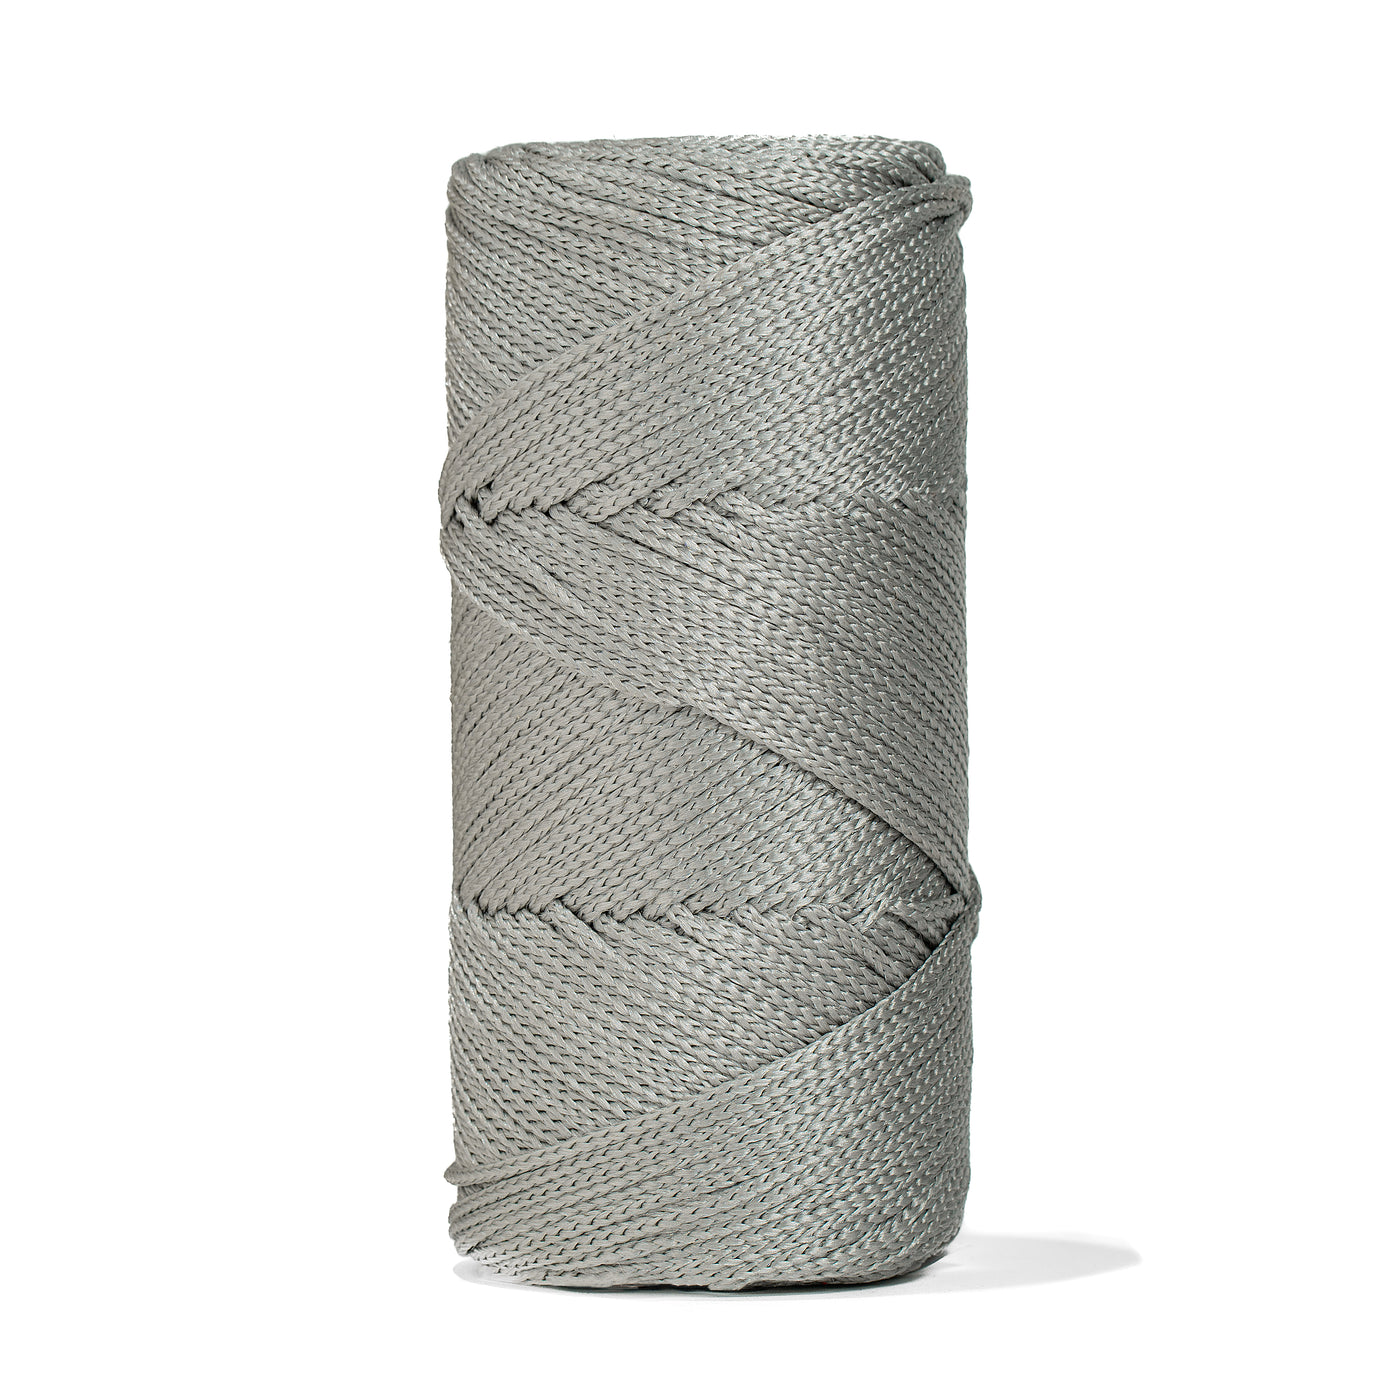 Outdoor 3 mm Macrame Braided Cord – Soft Gray Color